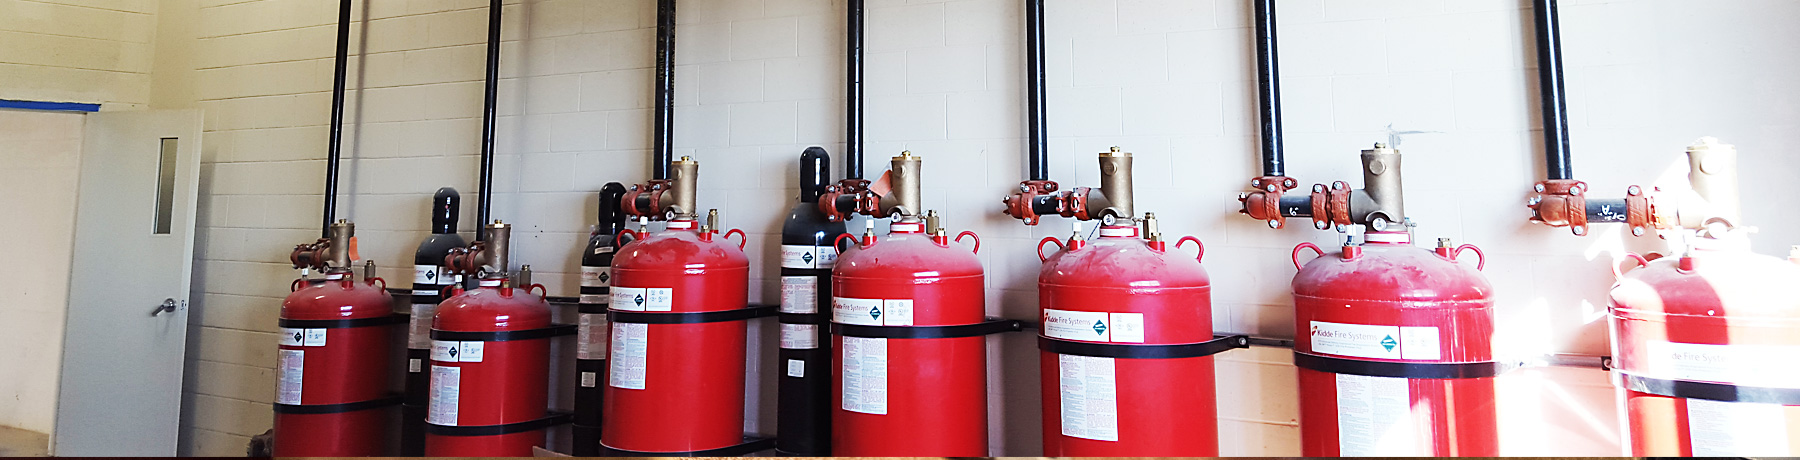 Industrial Fire Suppression Systems 3s Incorporated 1028